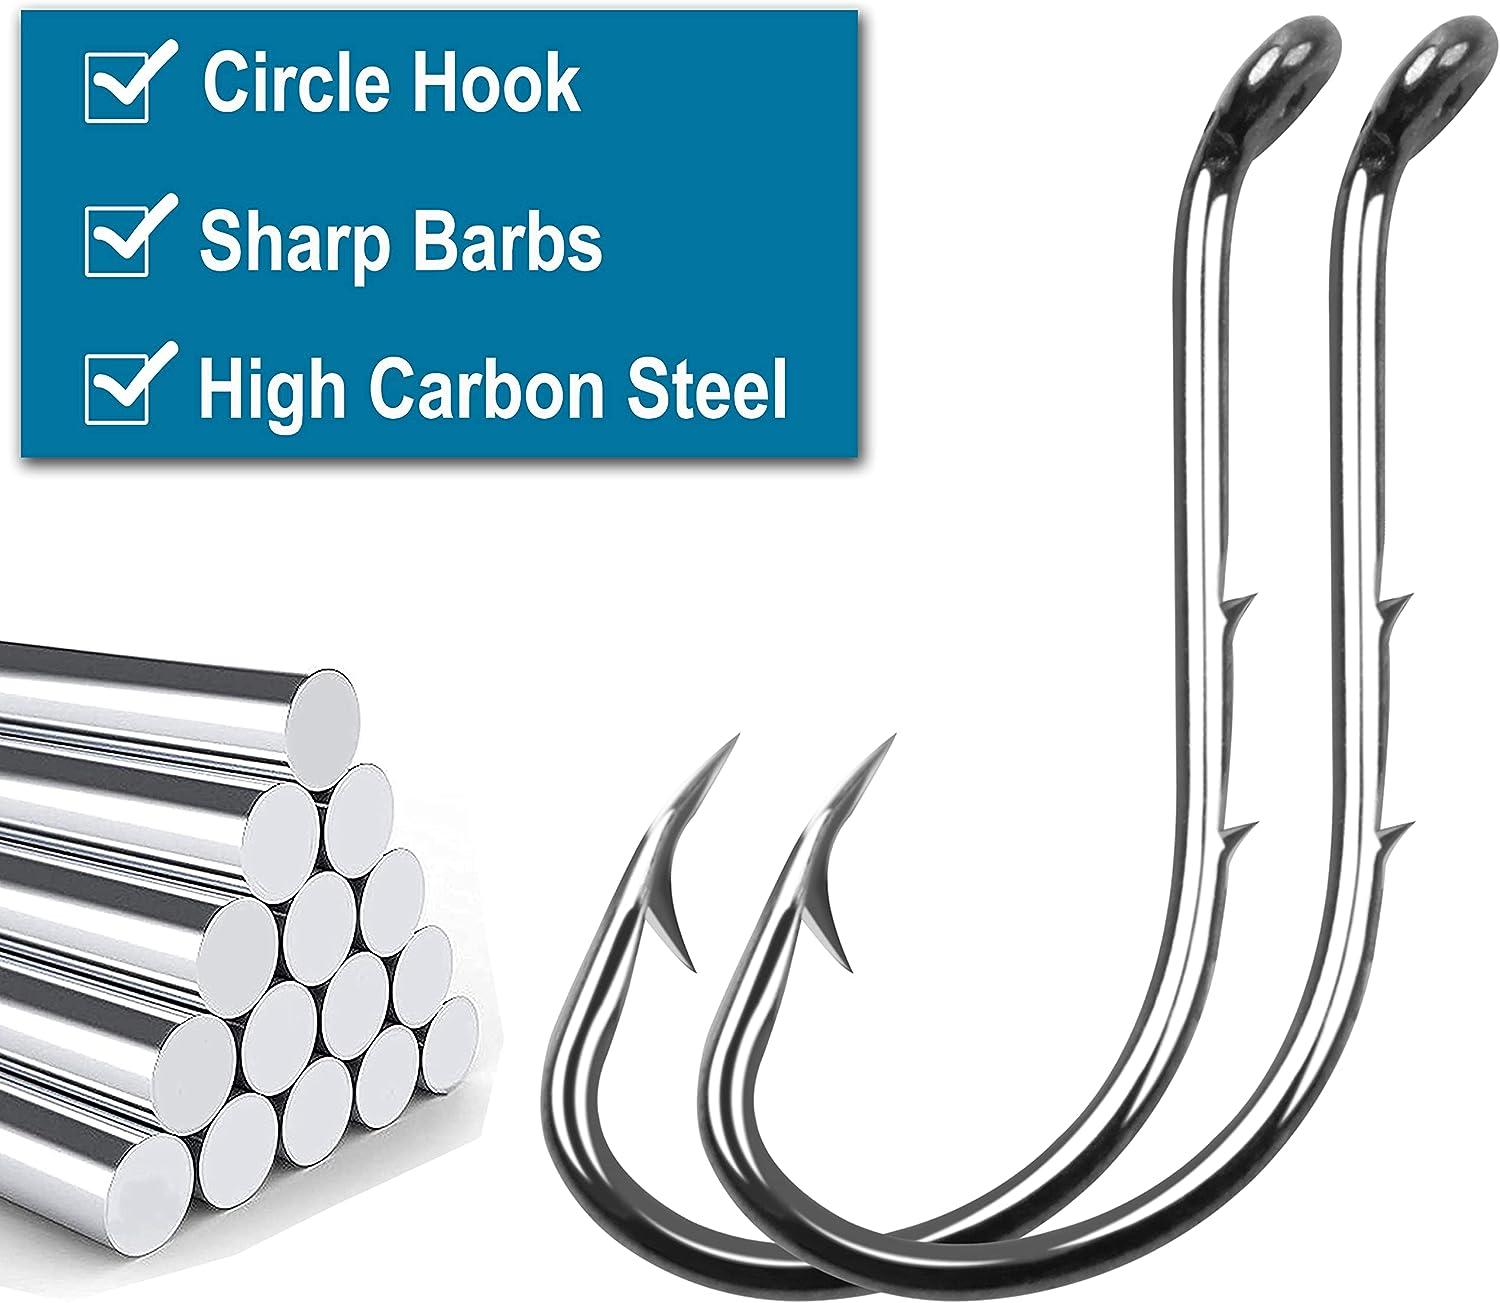 JZK 600pcs assorted Size 3 4 5 6 7 8 9 10 11 12, Carbon Steel Fishing Hooks  with Eyes, Small Fish Hooks with Barb, Circle Fishing Hooks with Plastic